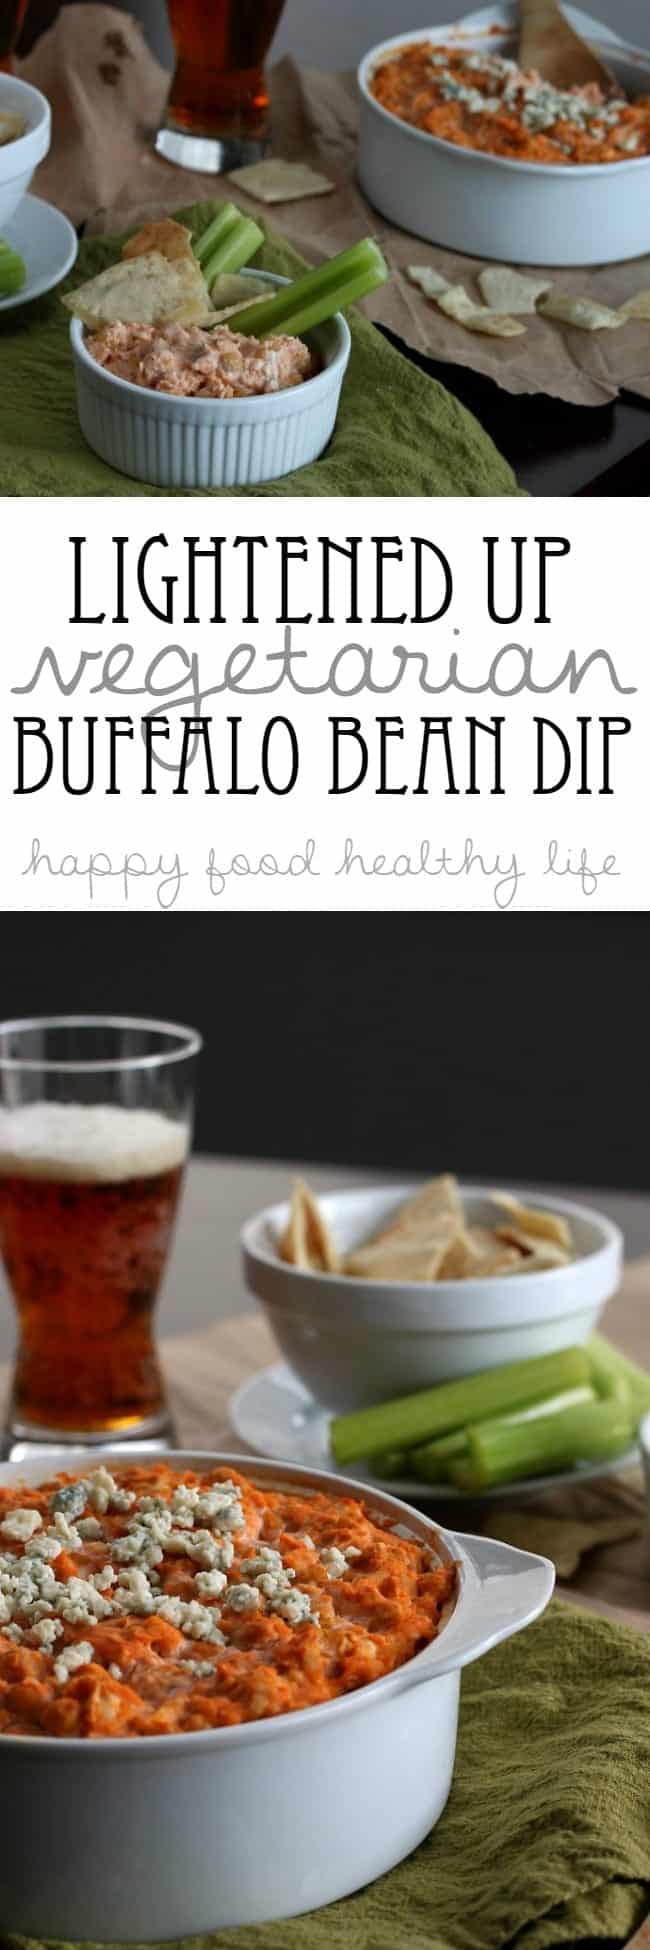 Lightened Up Vegetarian Buffalo Bean Dip - love chips and dip but want something lighter? this super addicting dip is the one for you! | www.happyfoodhealthylife.com